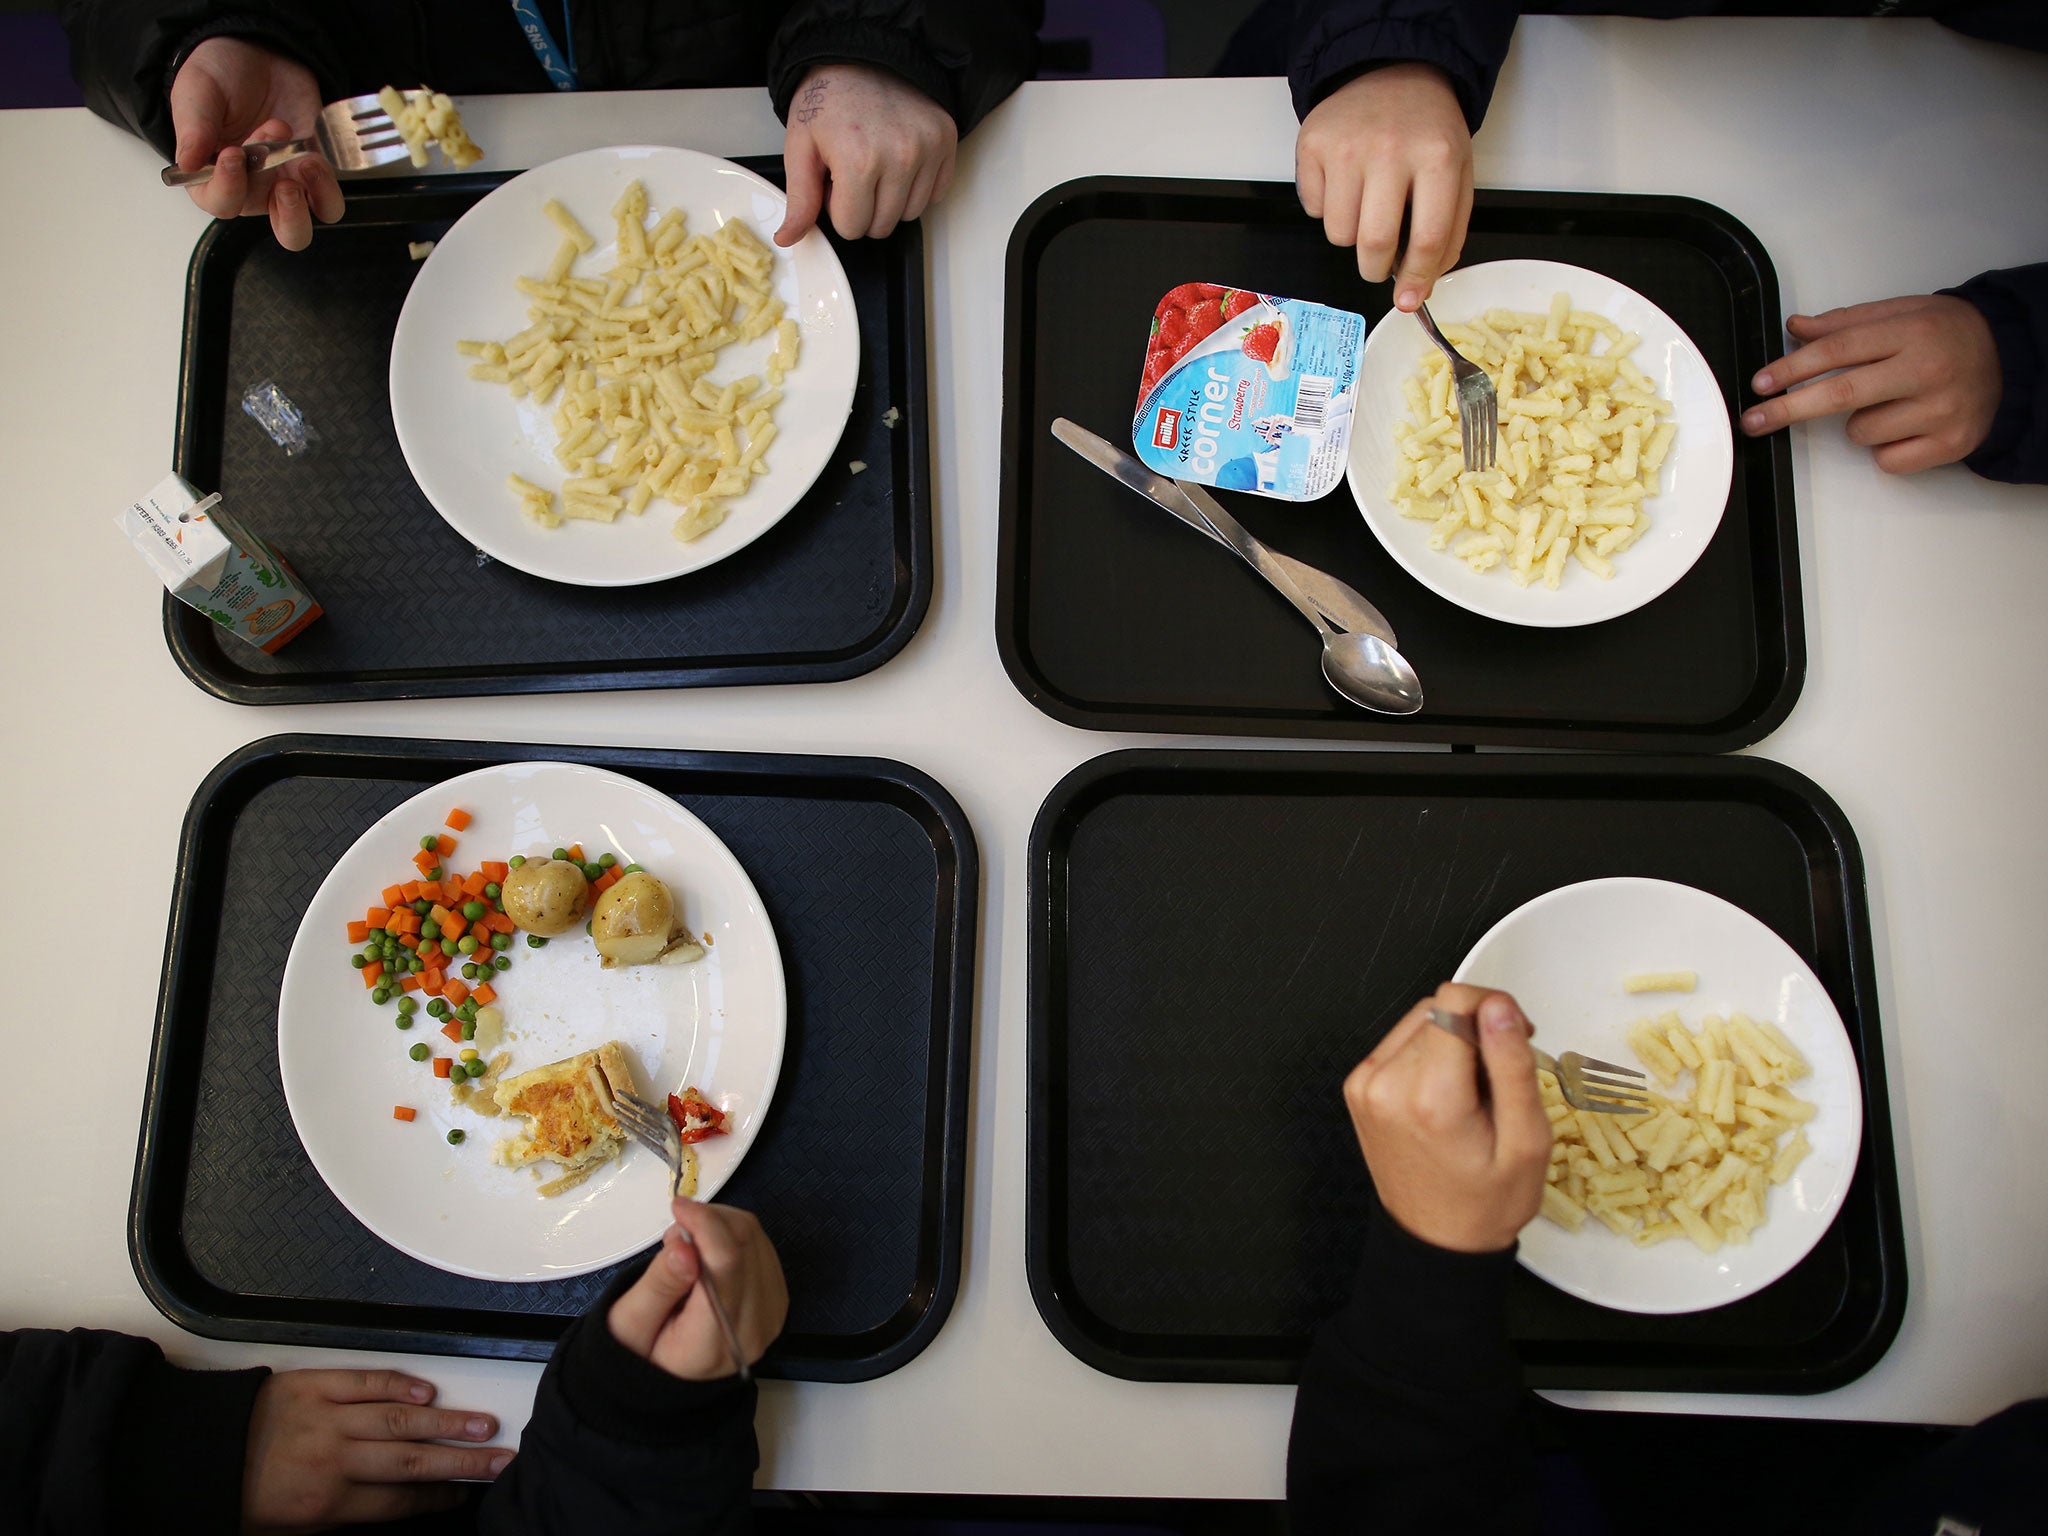 Children at a school in France were forced to wear discs at lunchtime